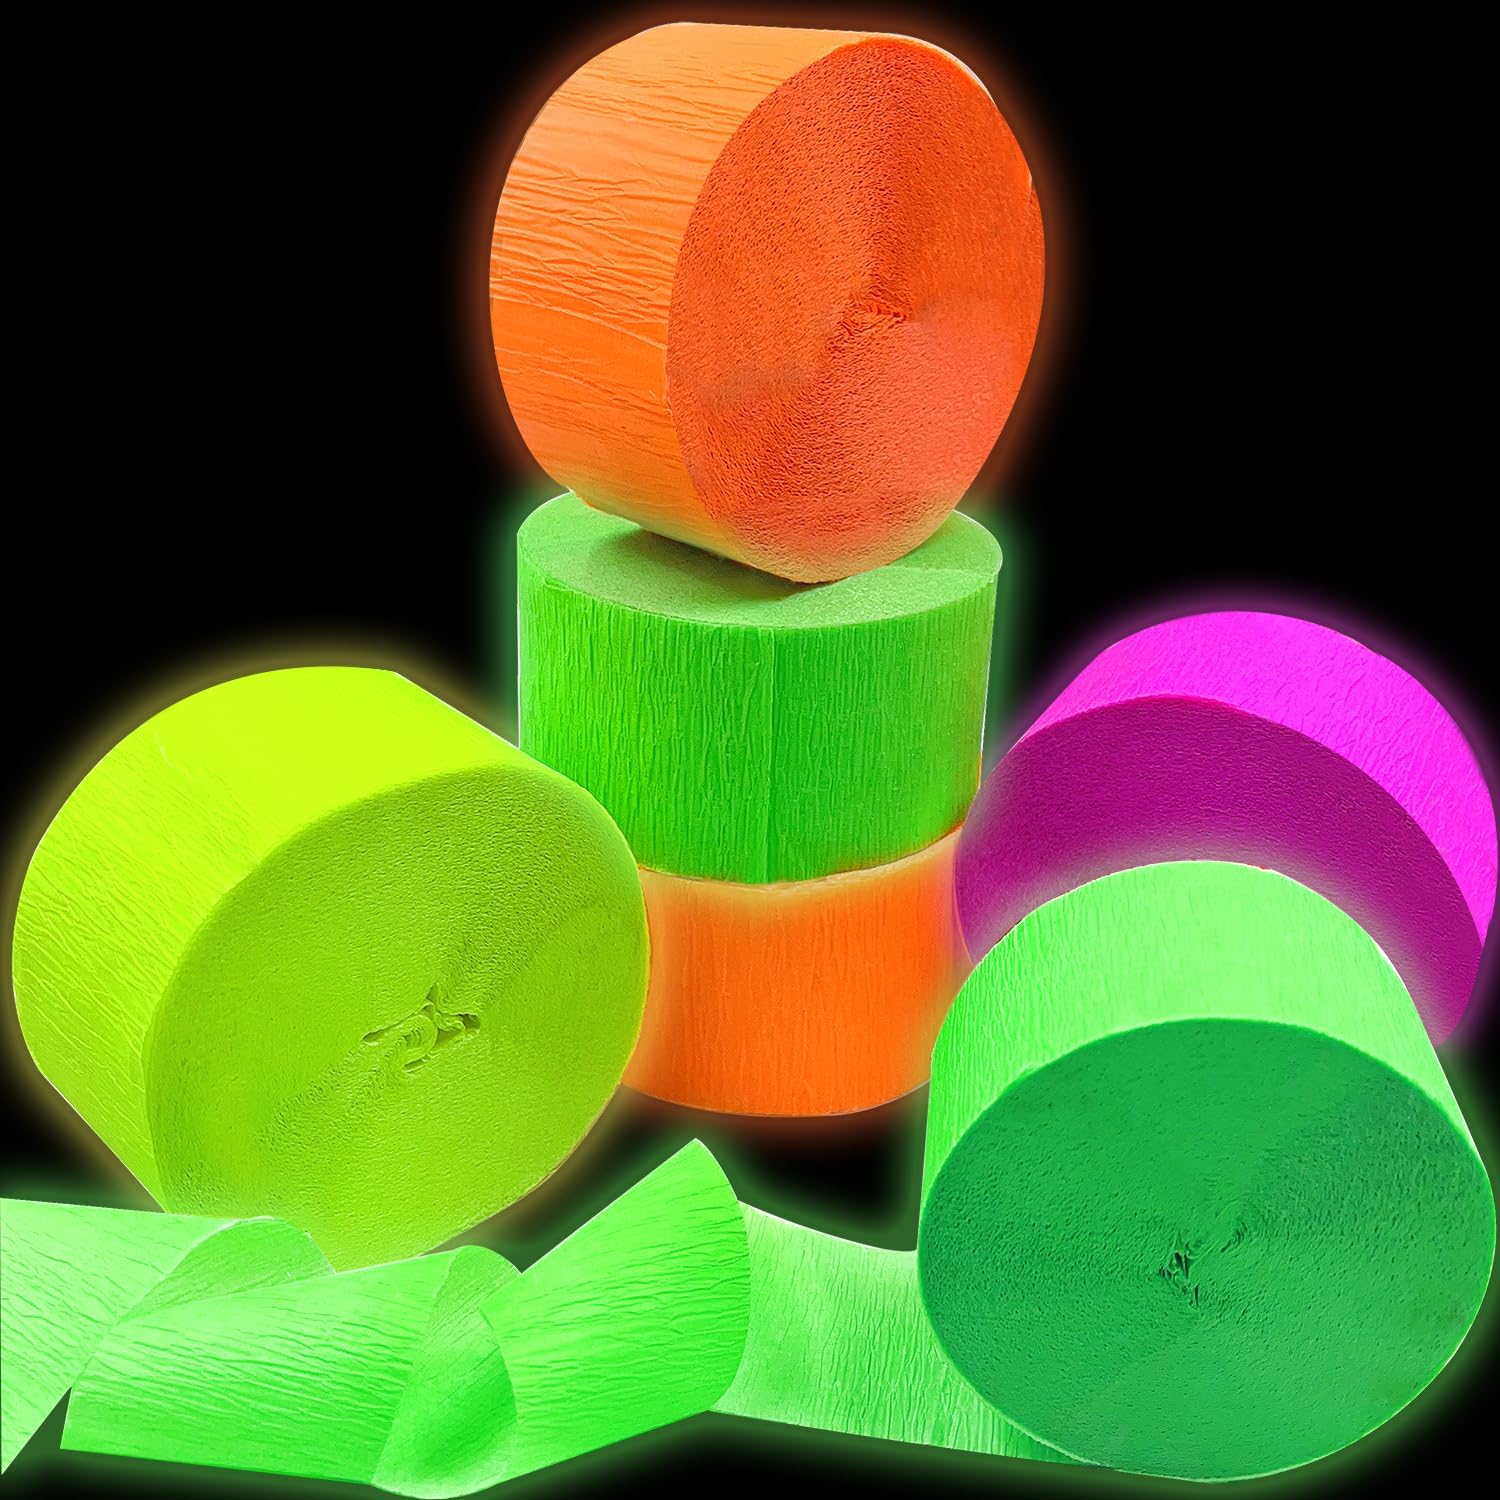 400FT Blacklight Party Streamer Decorations, 4 Rolls Glow Crepe Paper for Wedding, Birthday, Neon Party, Fiesta Party